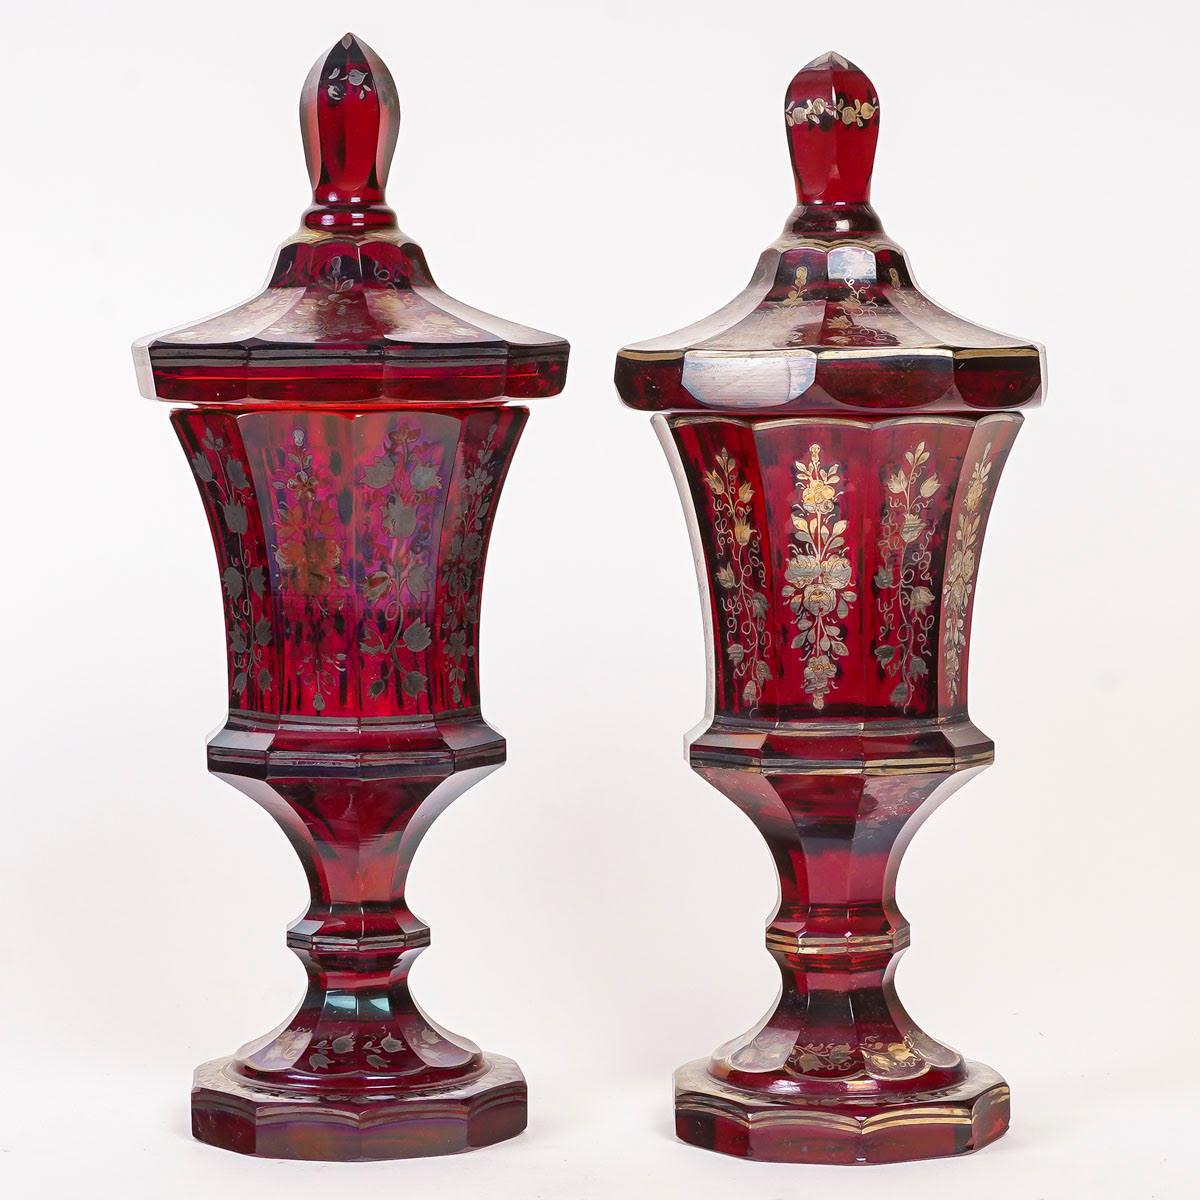 Pair of Large Bohemian Crystal Tumblers, 19th Century, Napoleon III Period. For Sale 3